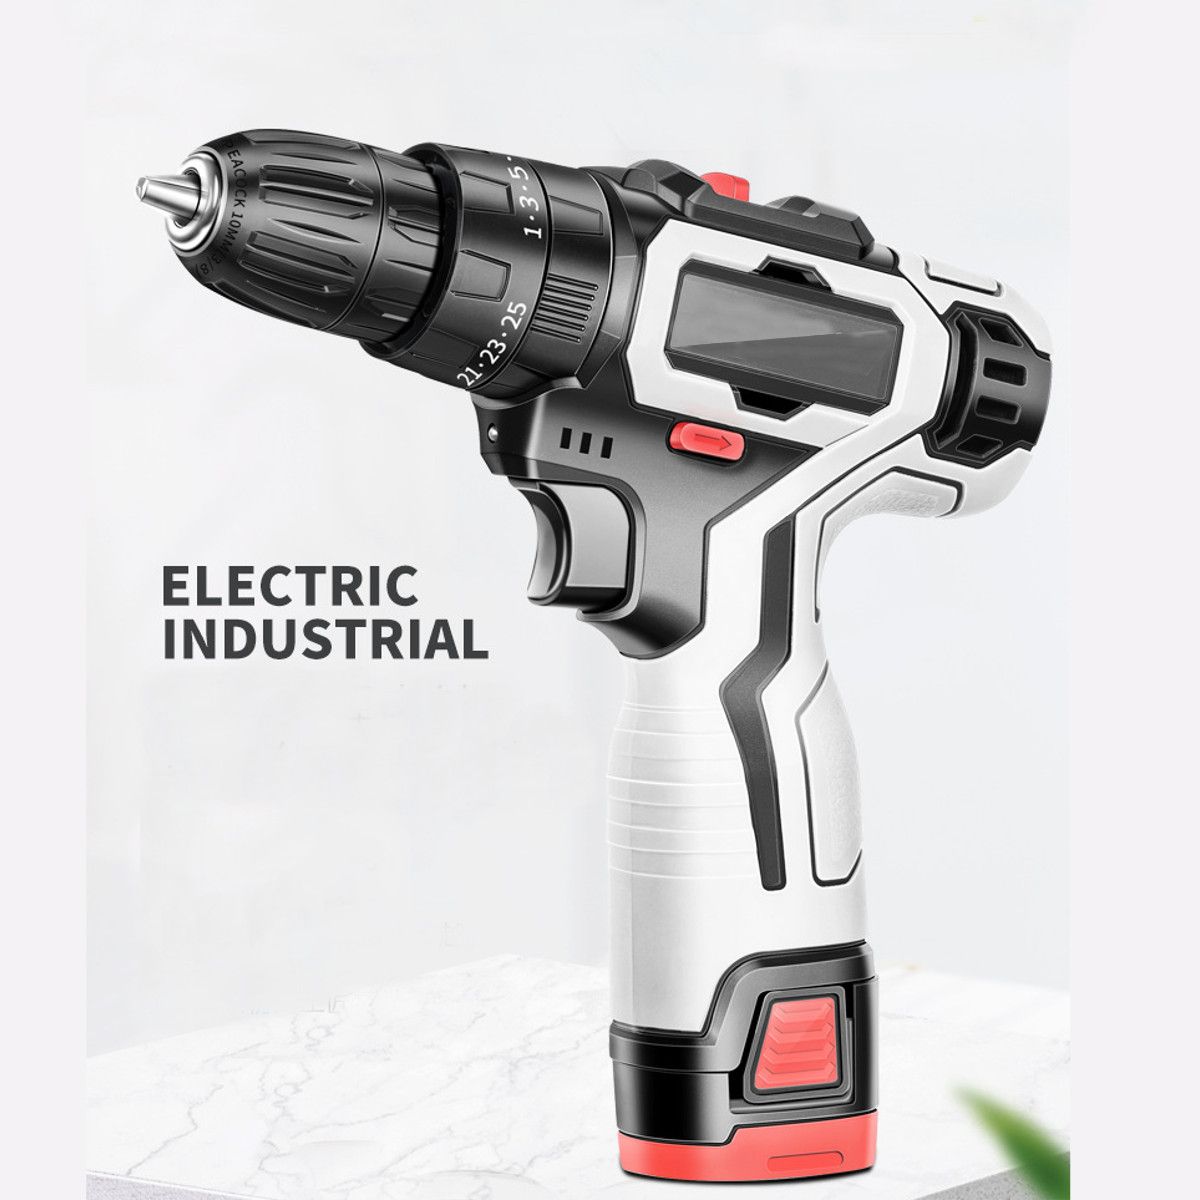 12V-1500mAH-25NM-Rechargeable-Cordless-Drill-2-Speeds-Electric-Screwdriver-Power-Tool-1736770